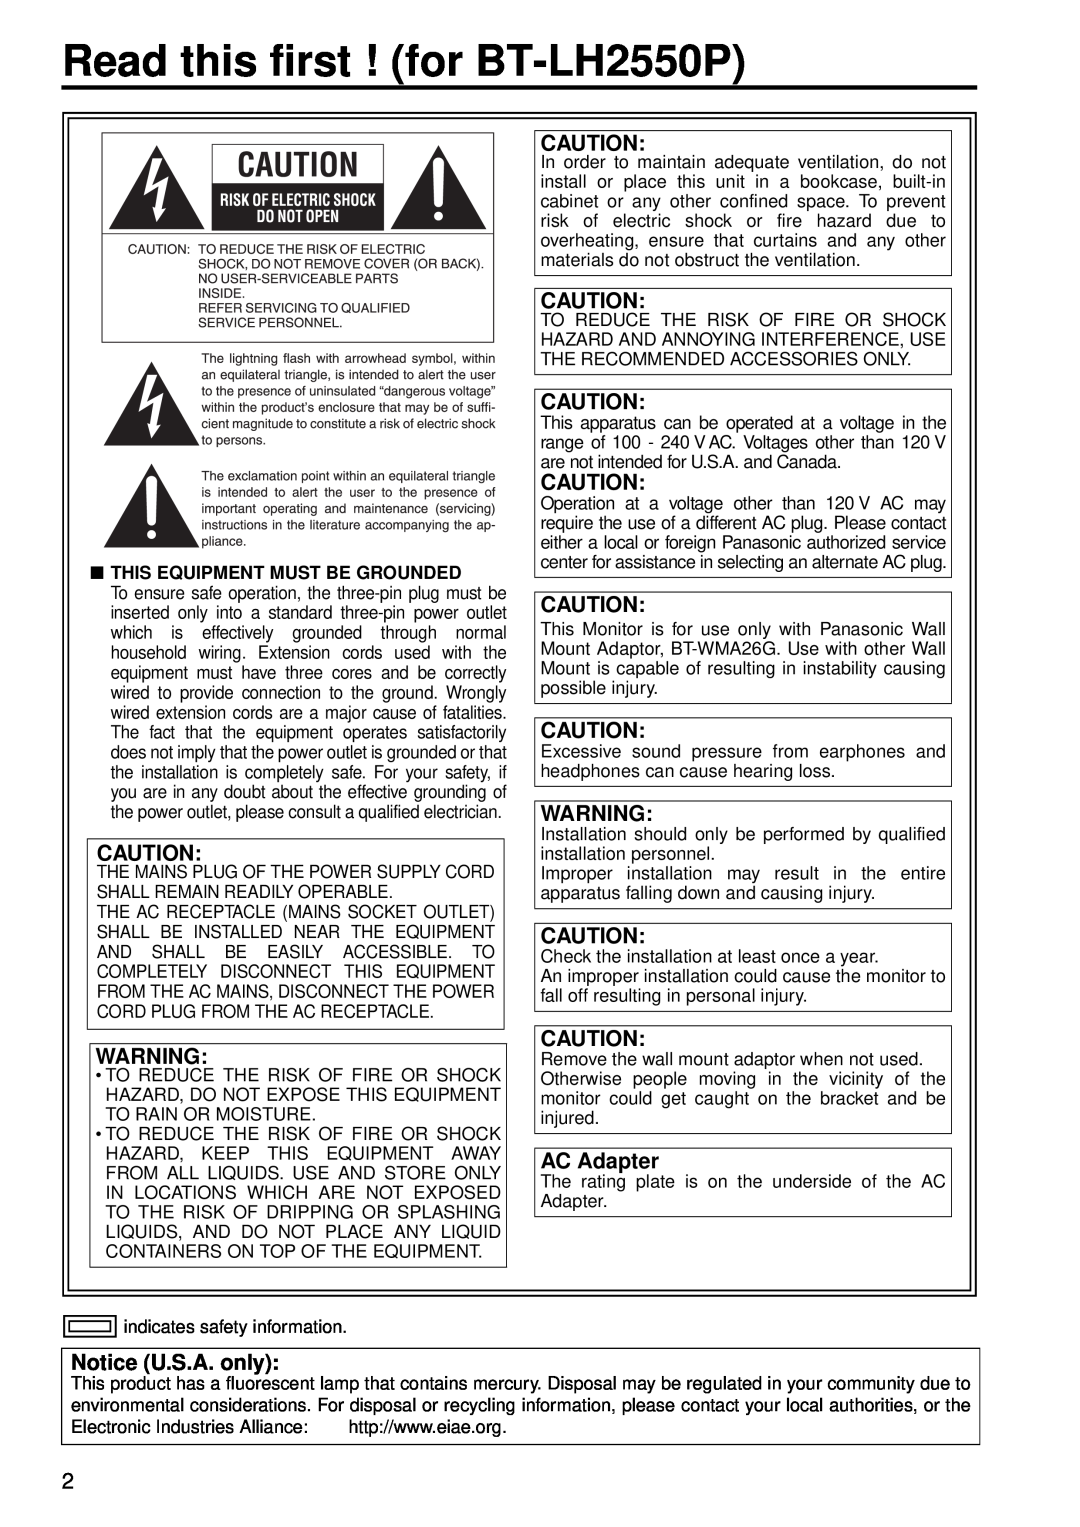 Panasonic BT-LH2550E manual Read this first ! for BT-LH2550P, AC Adapter, Notice U.S.A. only 